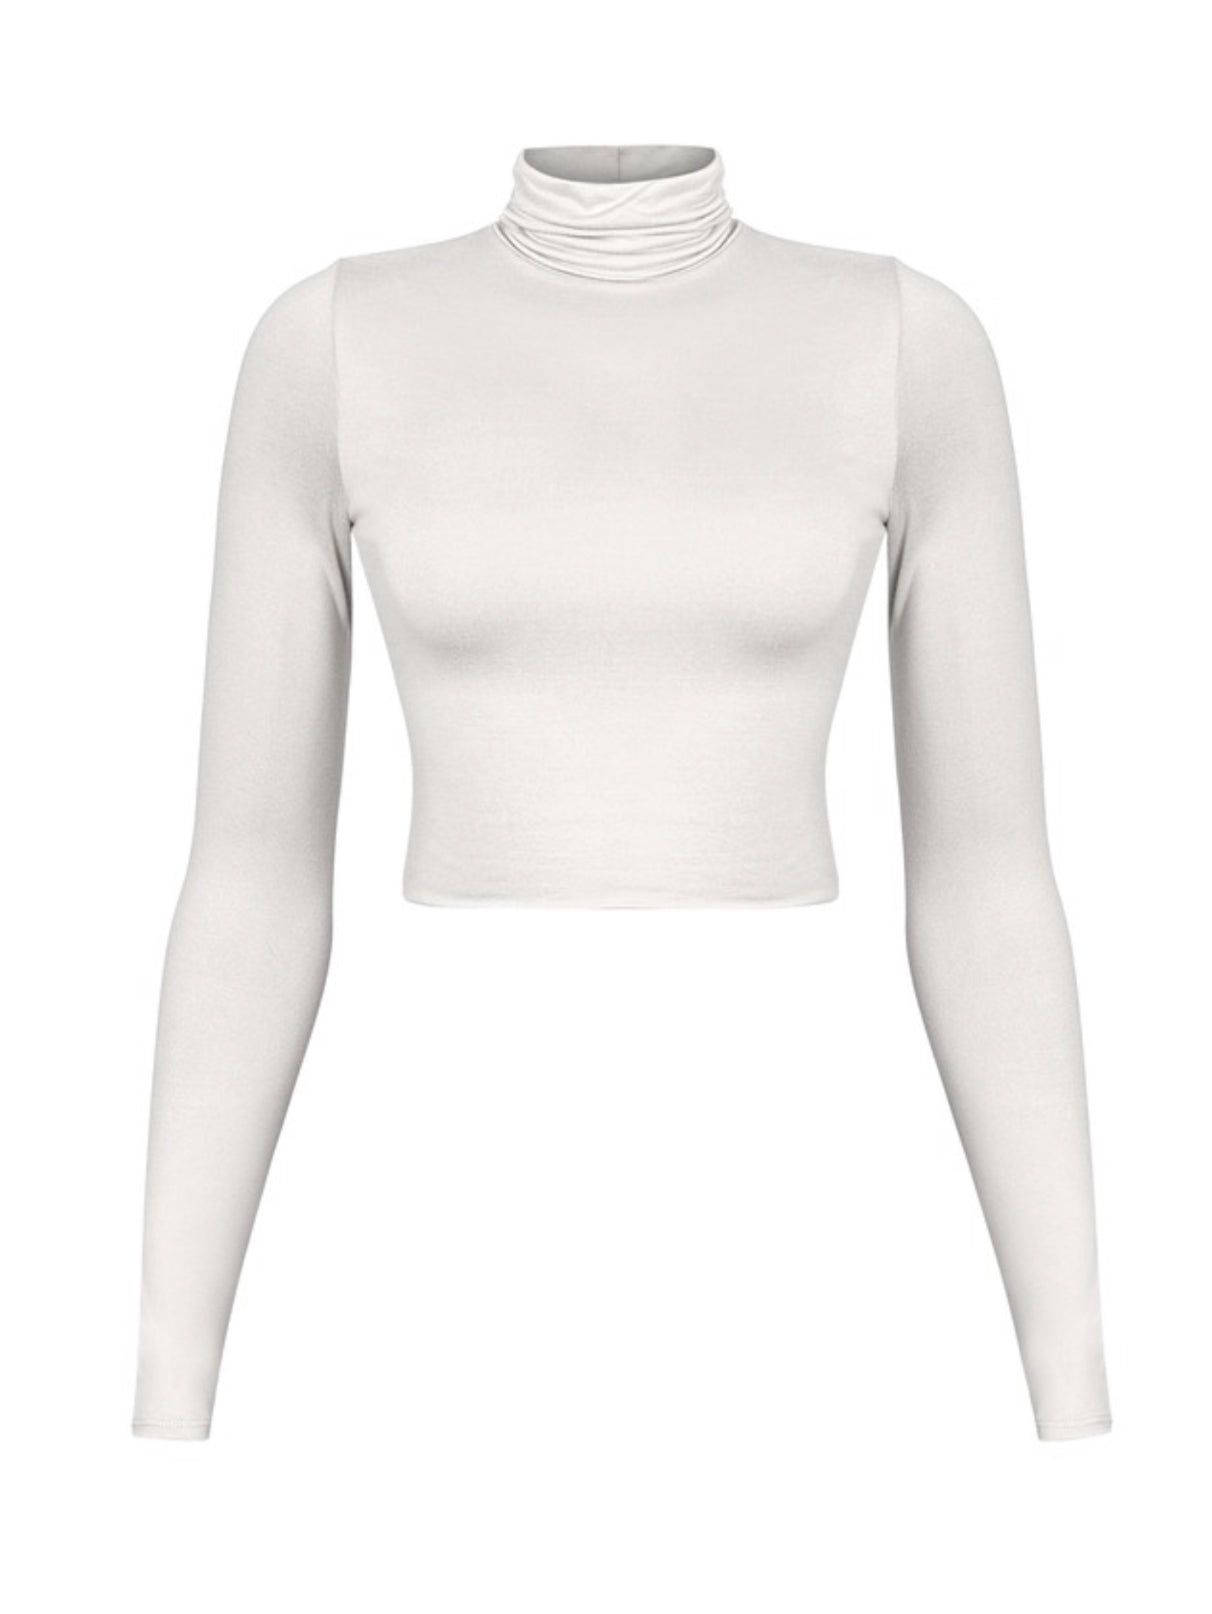 Rese Top - White